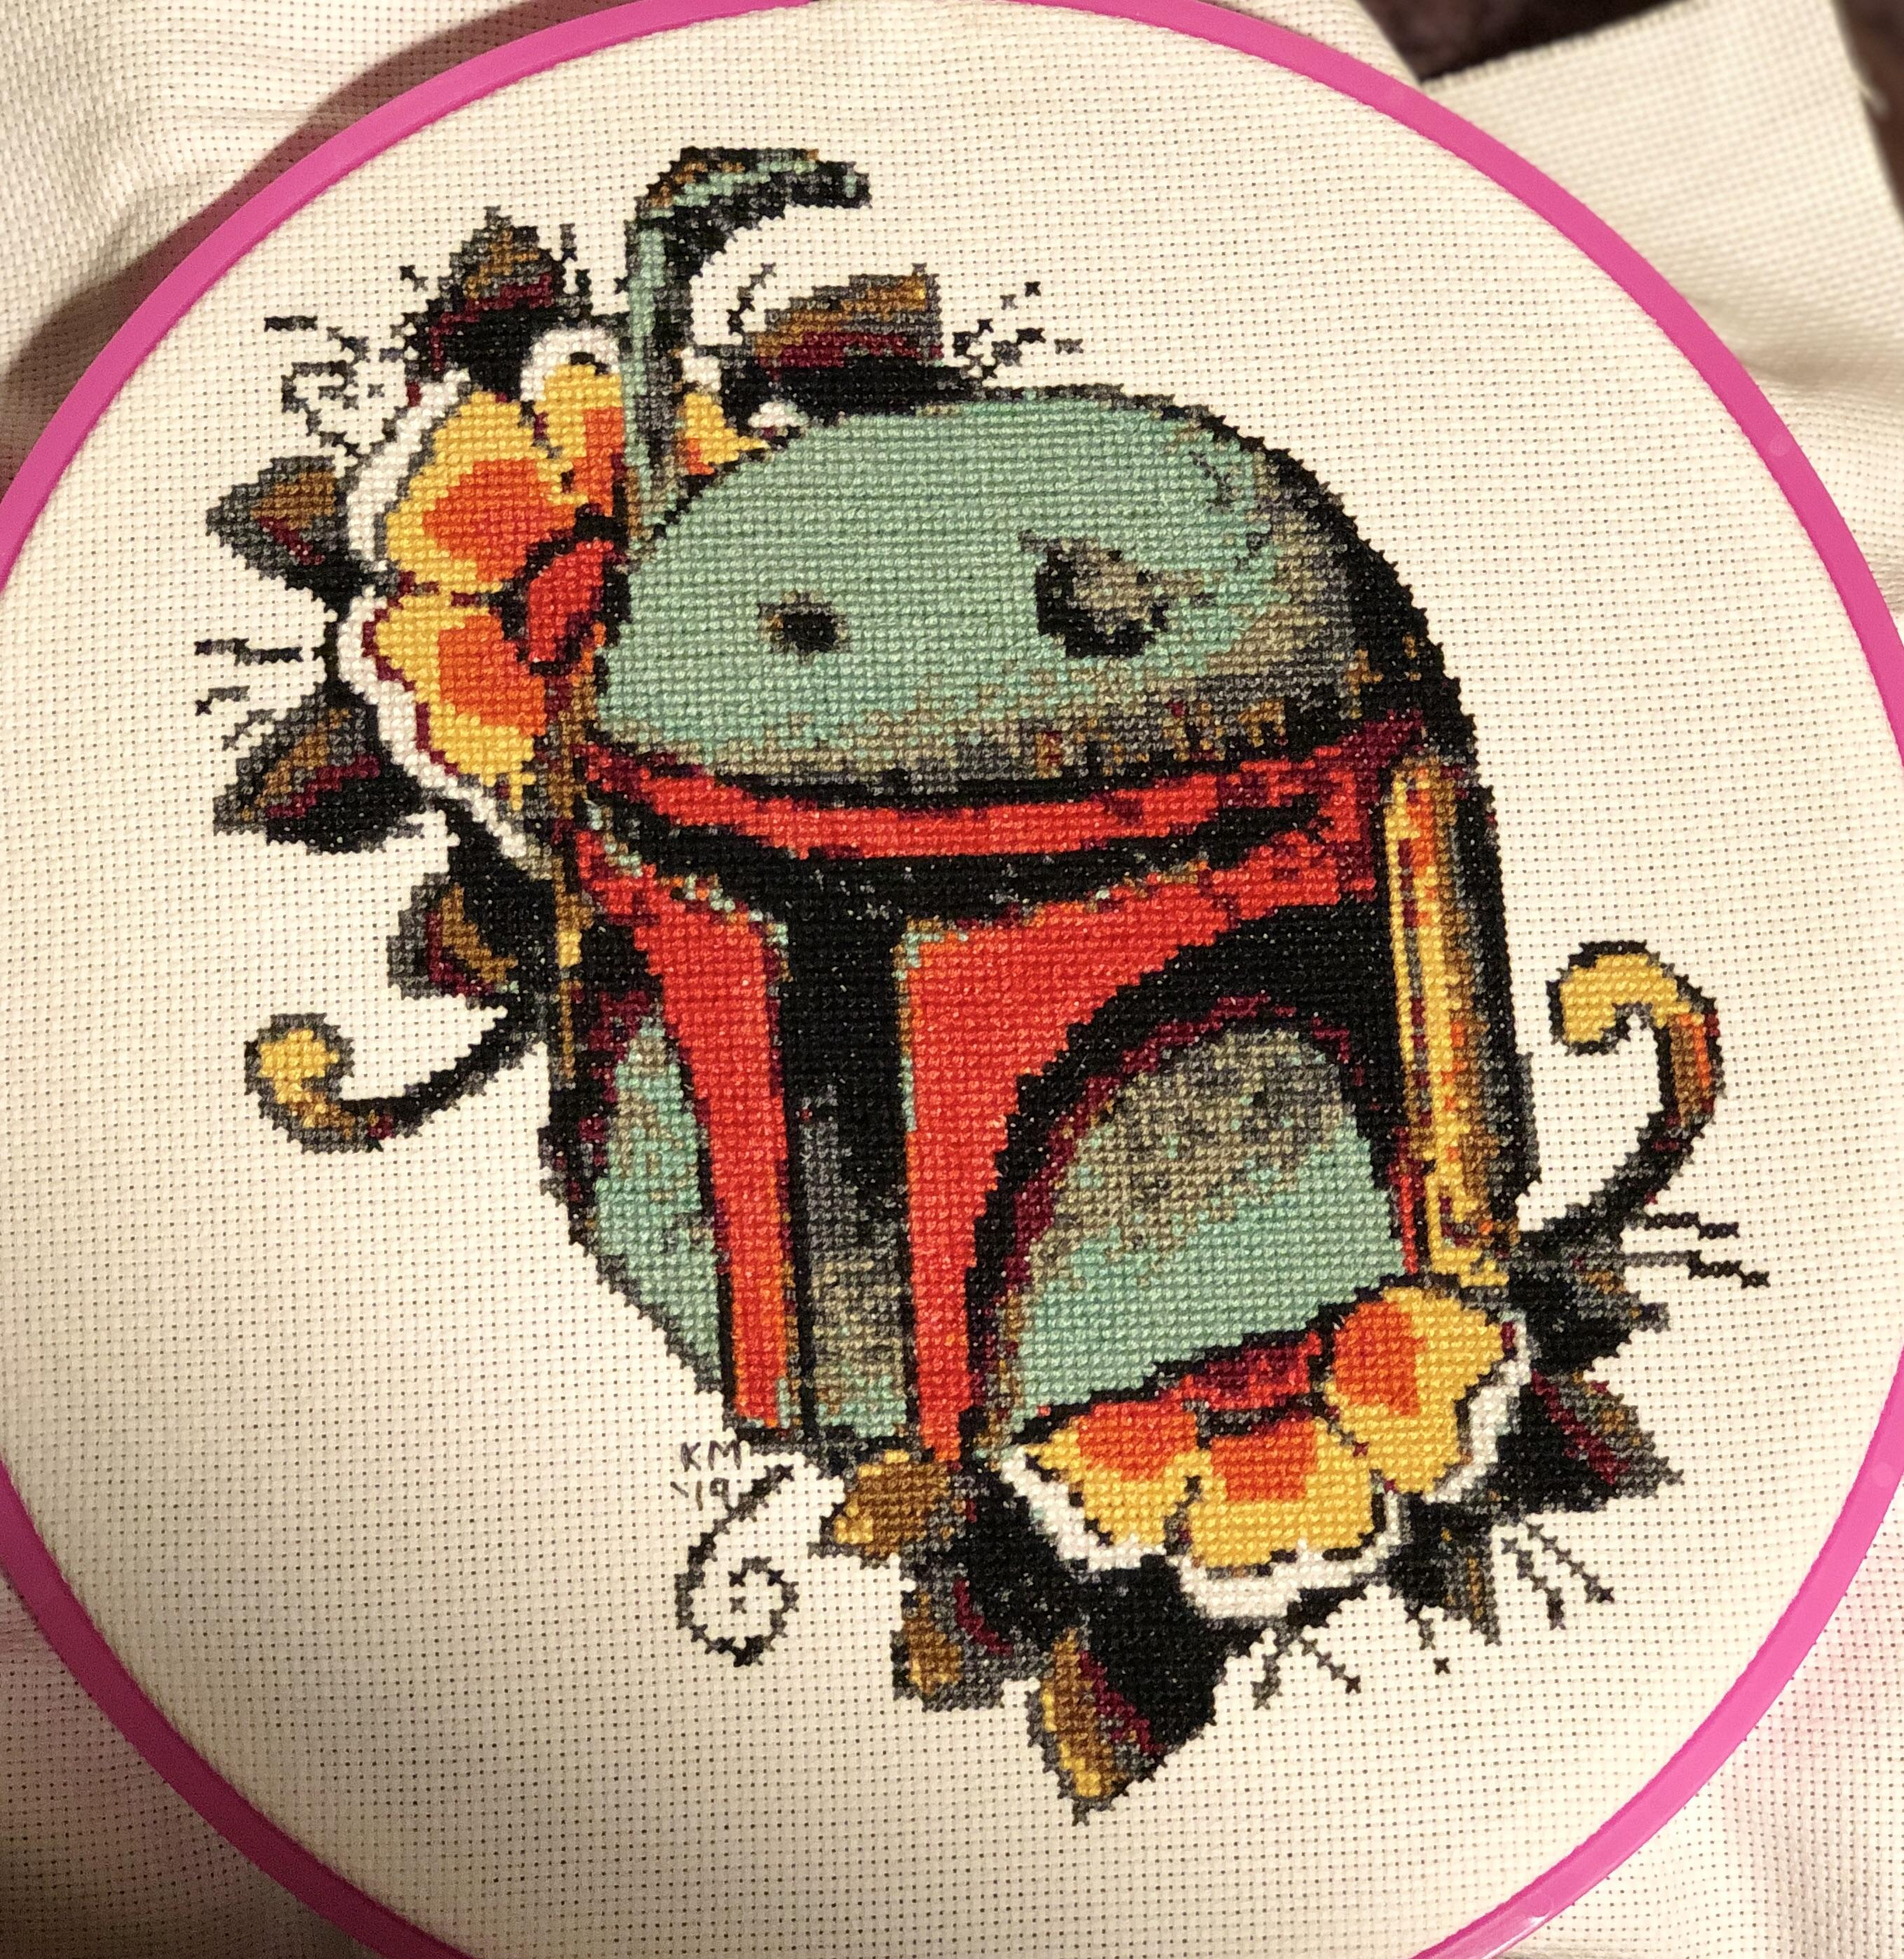 Star Wars Embroidery Pattern Fo Boba Fetts Helmet From Star Wars I Loved The Retro 70s